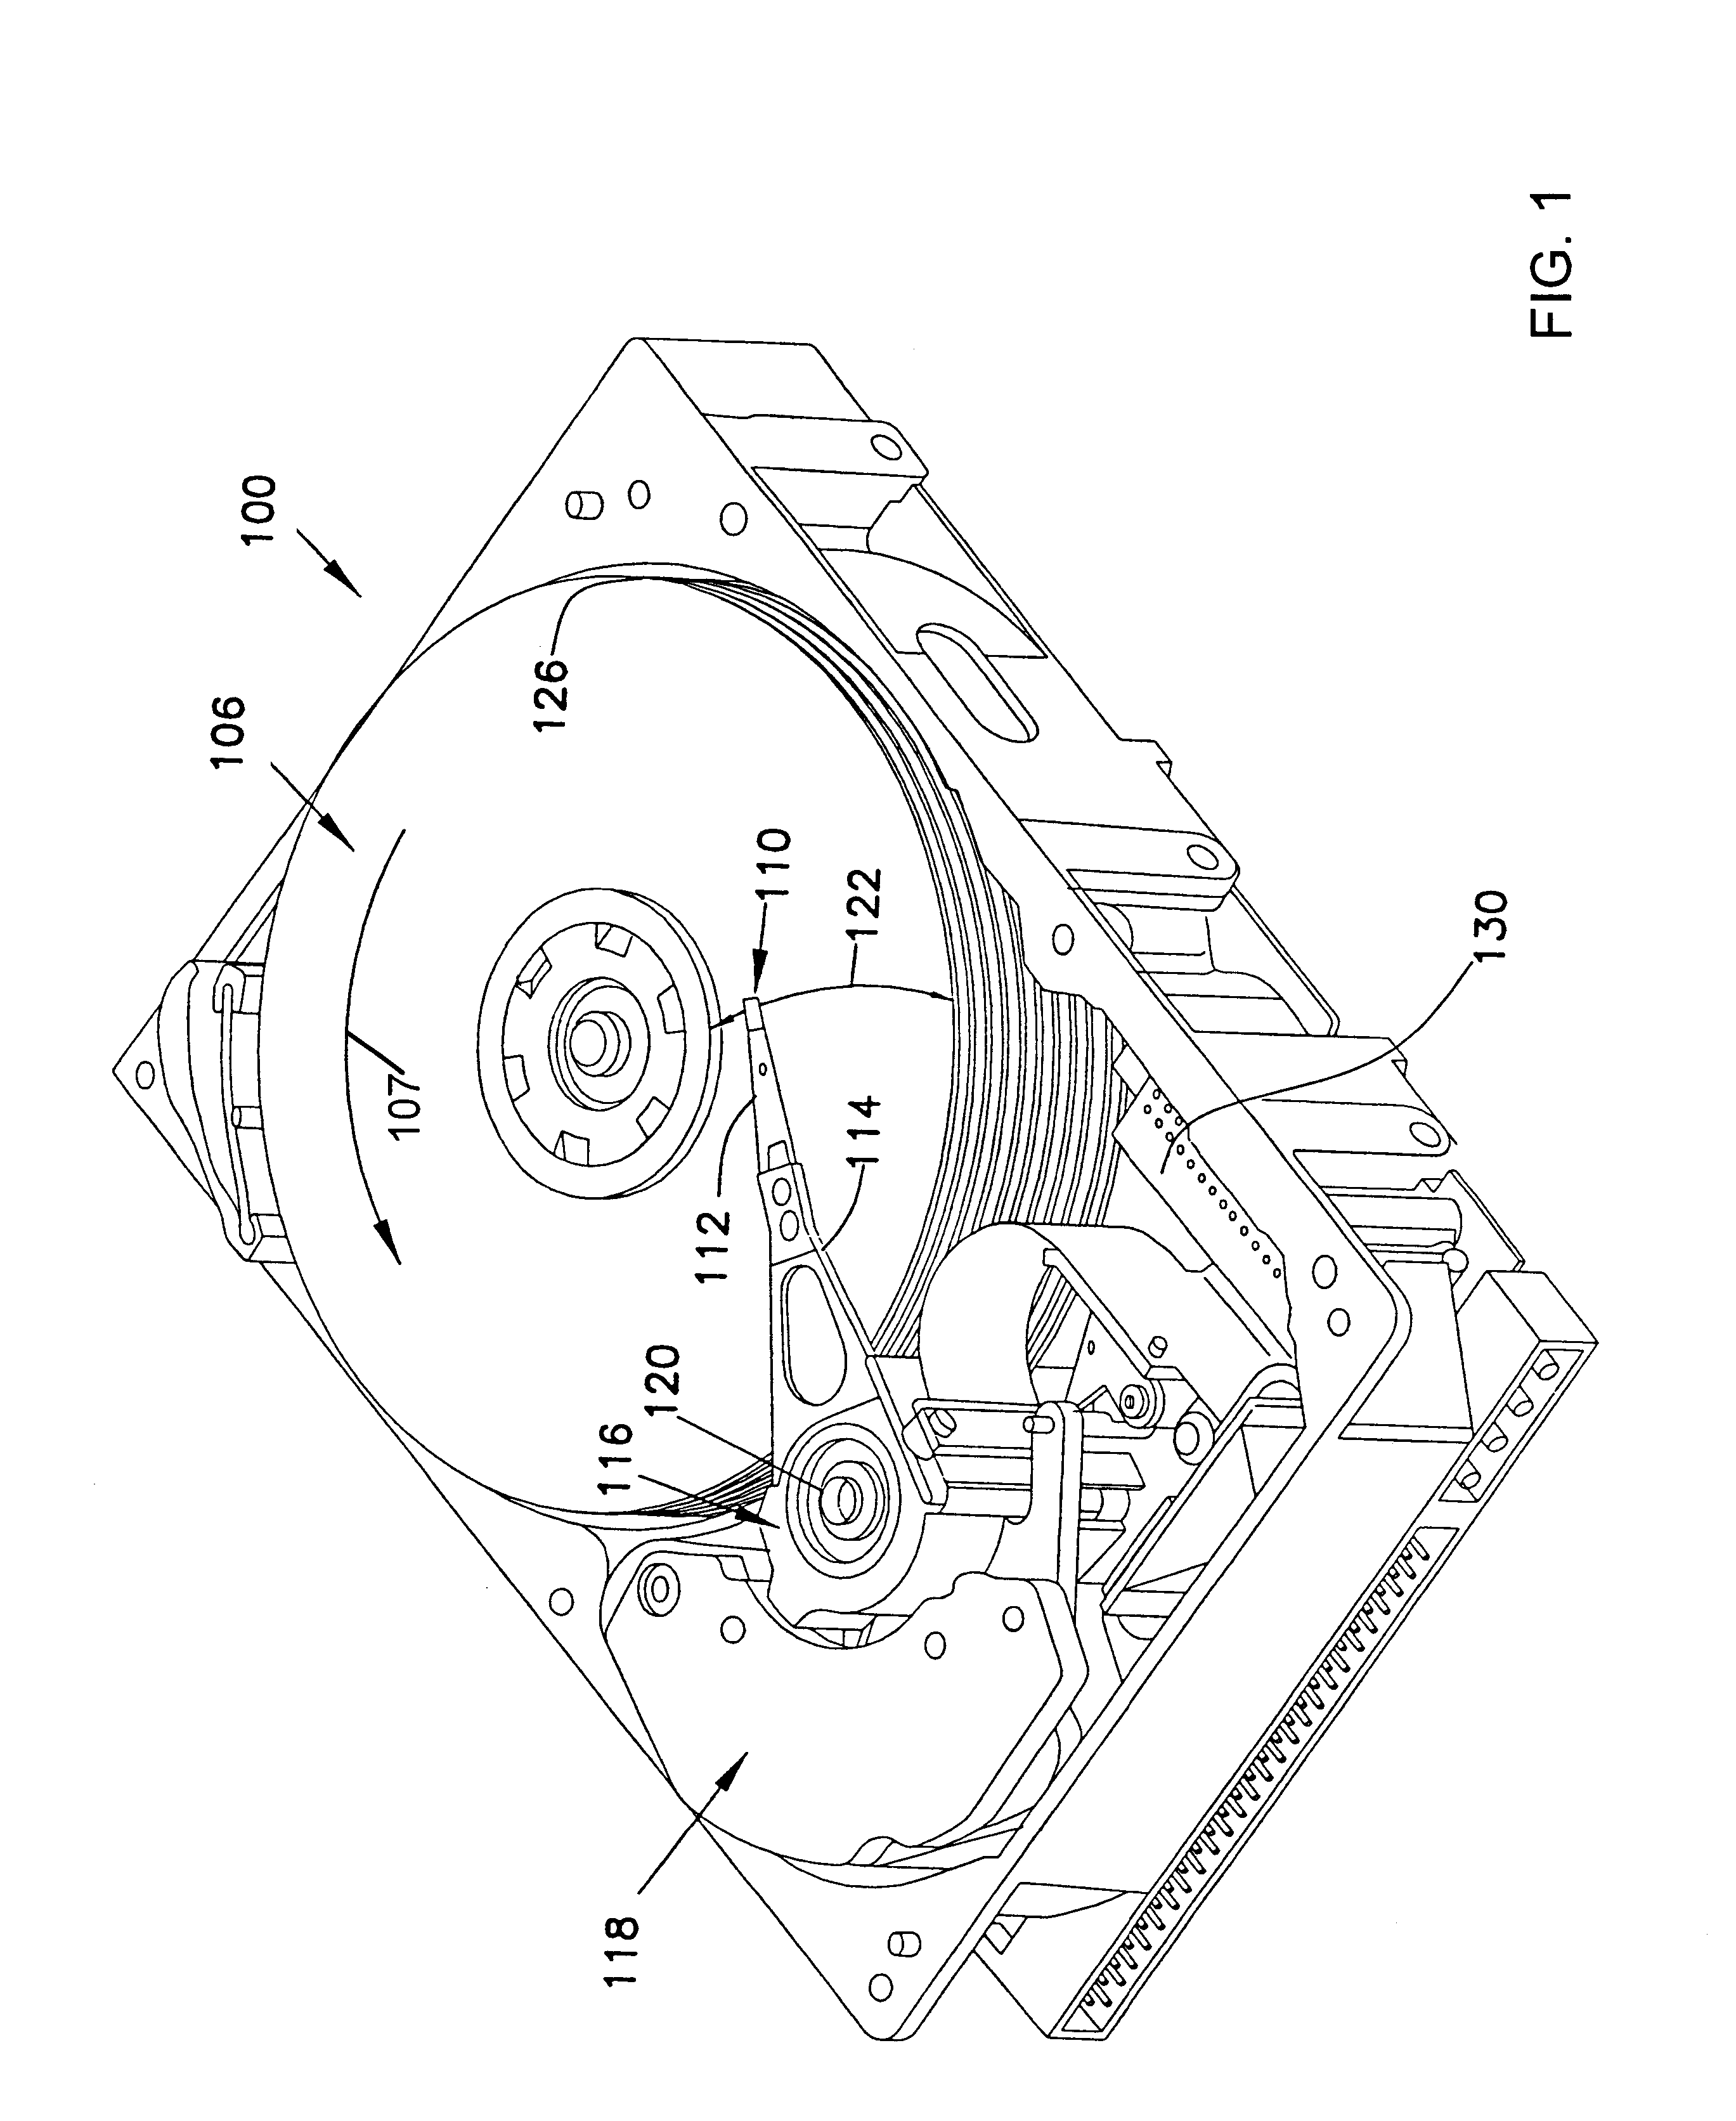 Non-magnetic metallic layer in a reader gap of a disc drive